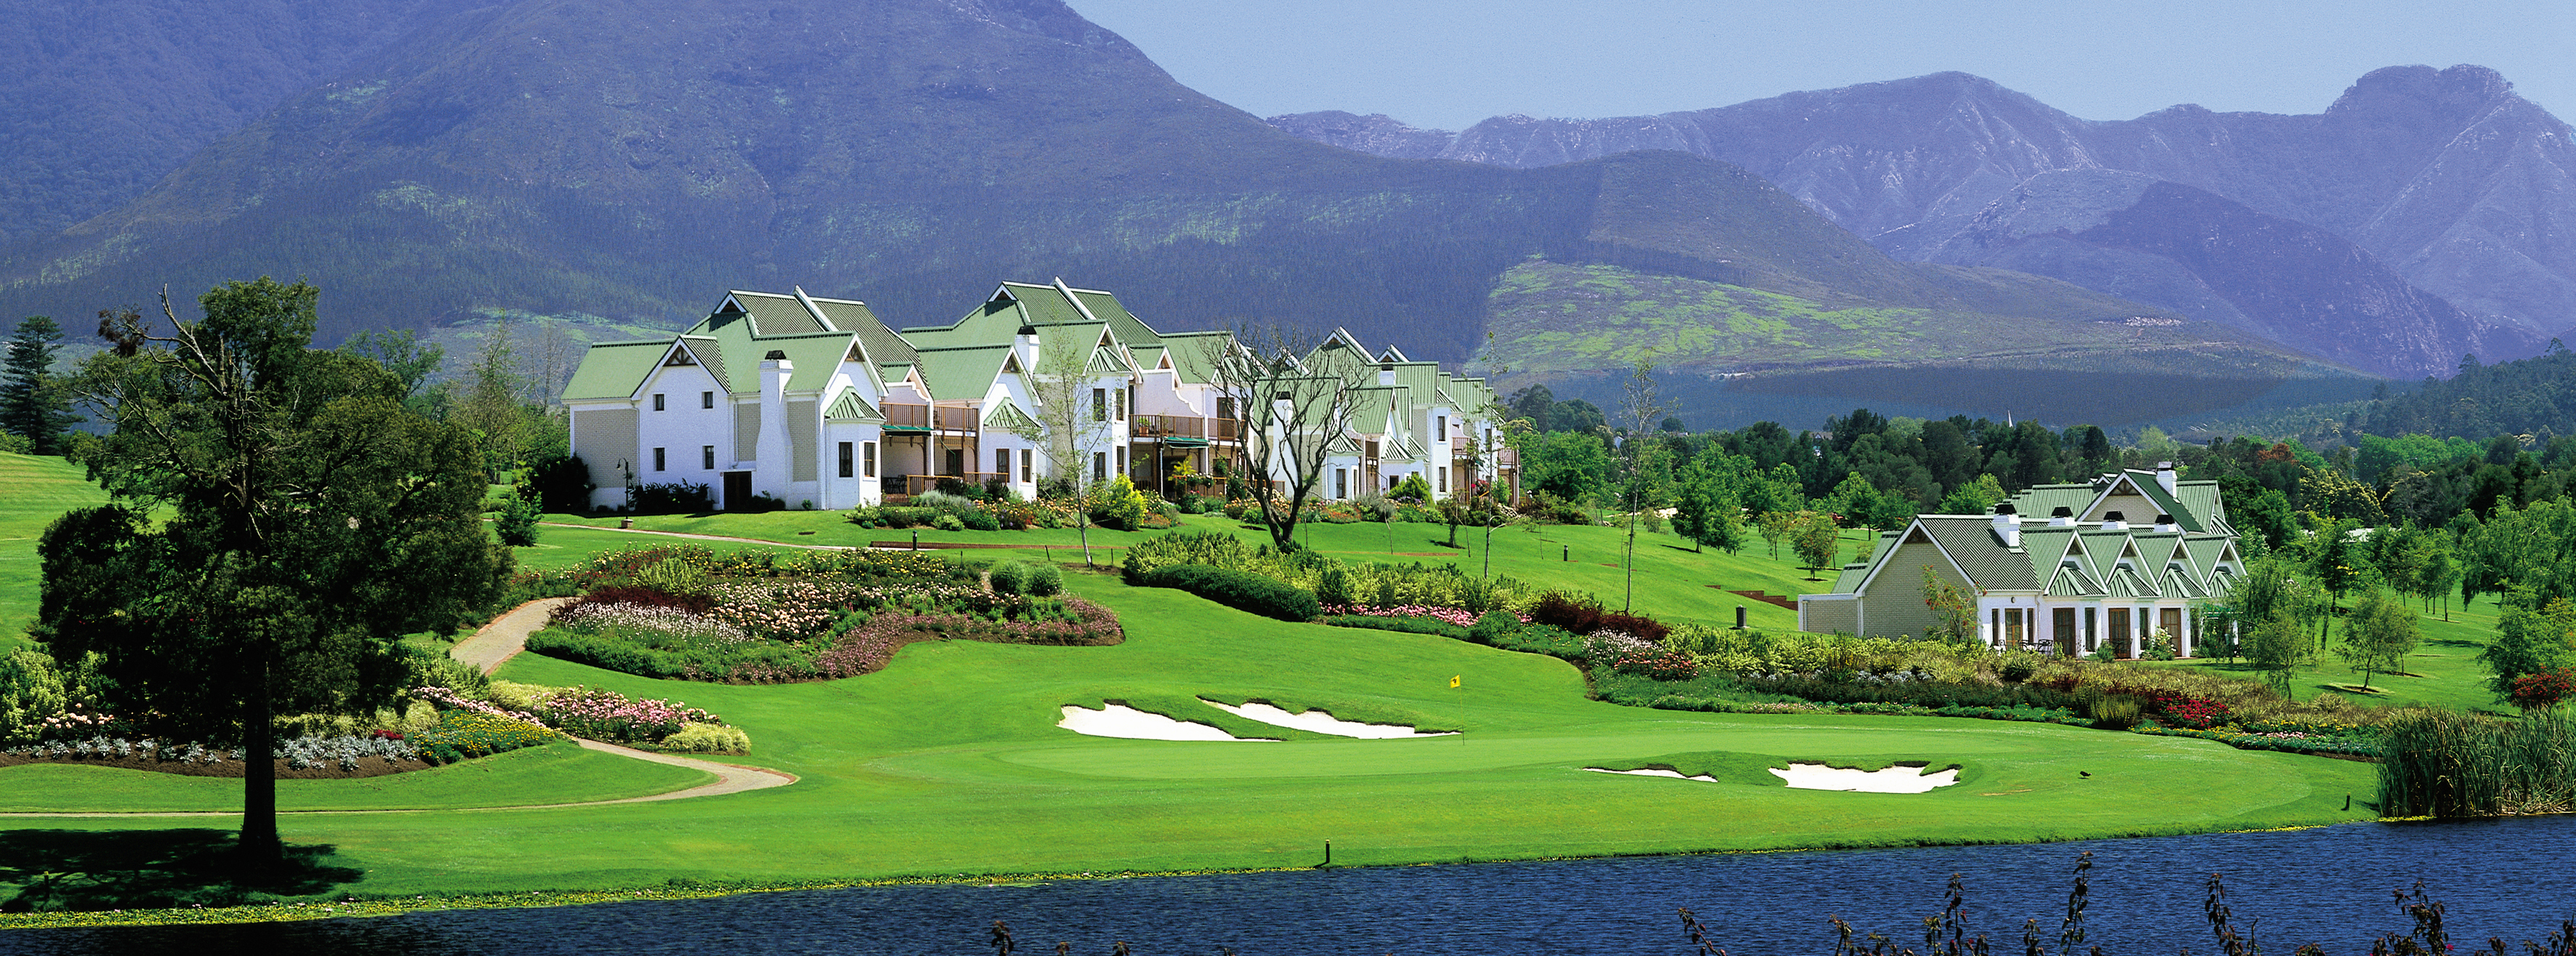 6 nights Cape Town and Garden Route Golf Holiday | Cape ...